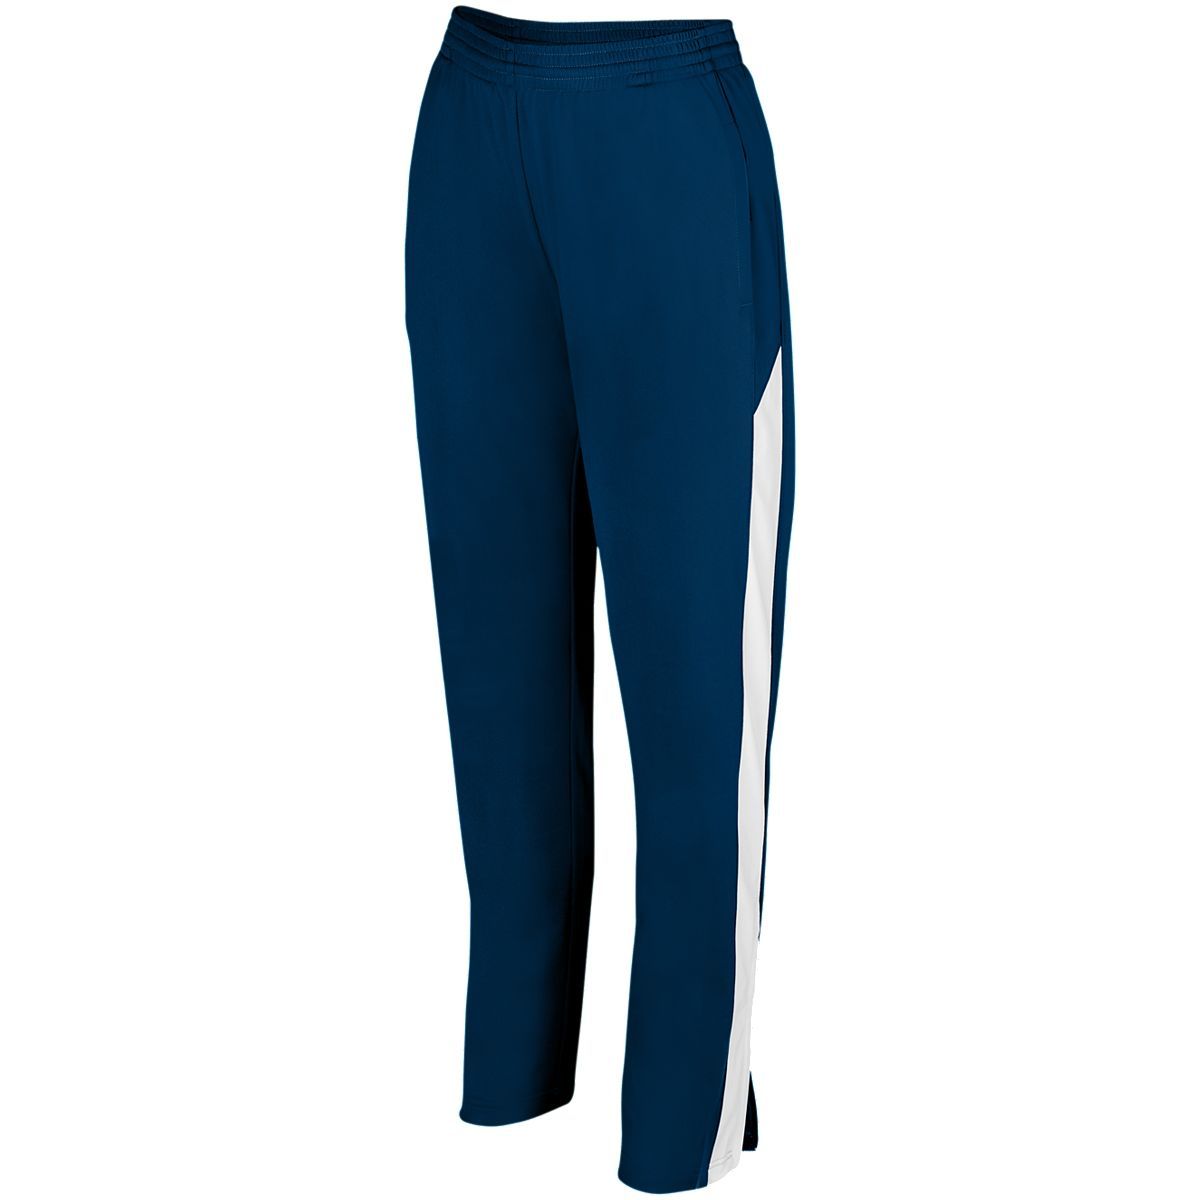 Augusta Sportswear Ladies Medalist Pant 2.0 in Navy/White  -Part of the Ladies, Ladies-Pants, Pants, Augusta-Products product lines at KanaleyCreations.com